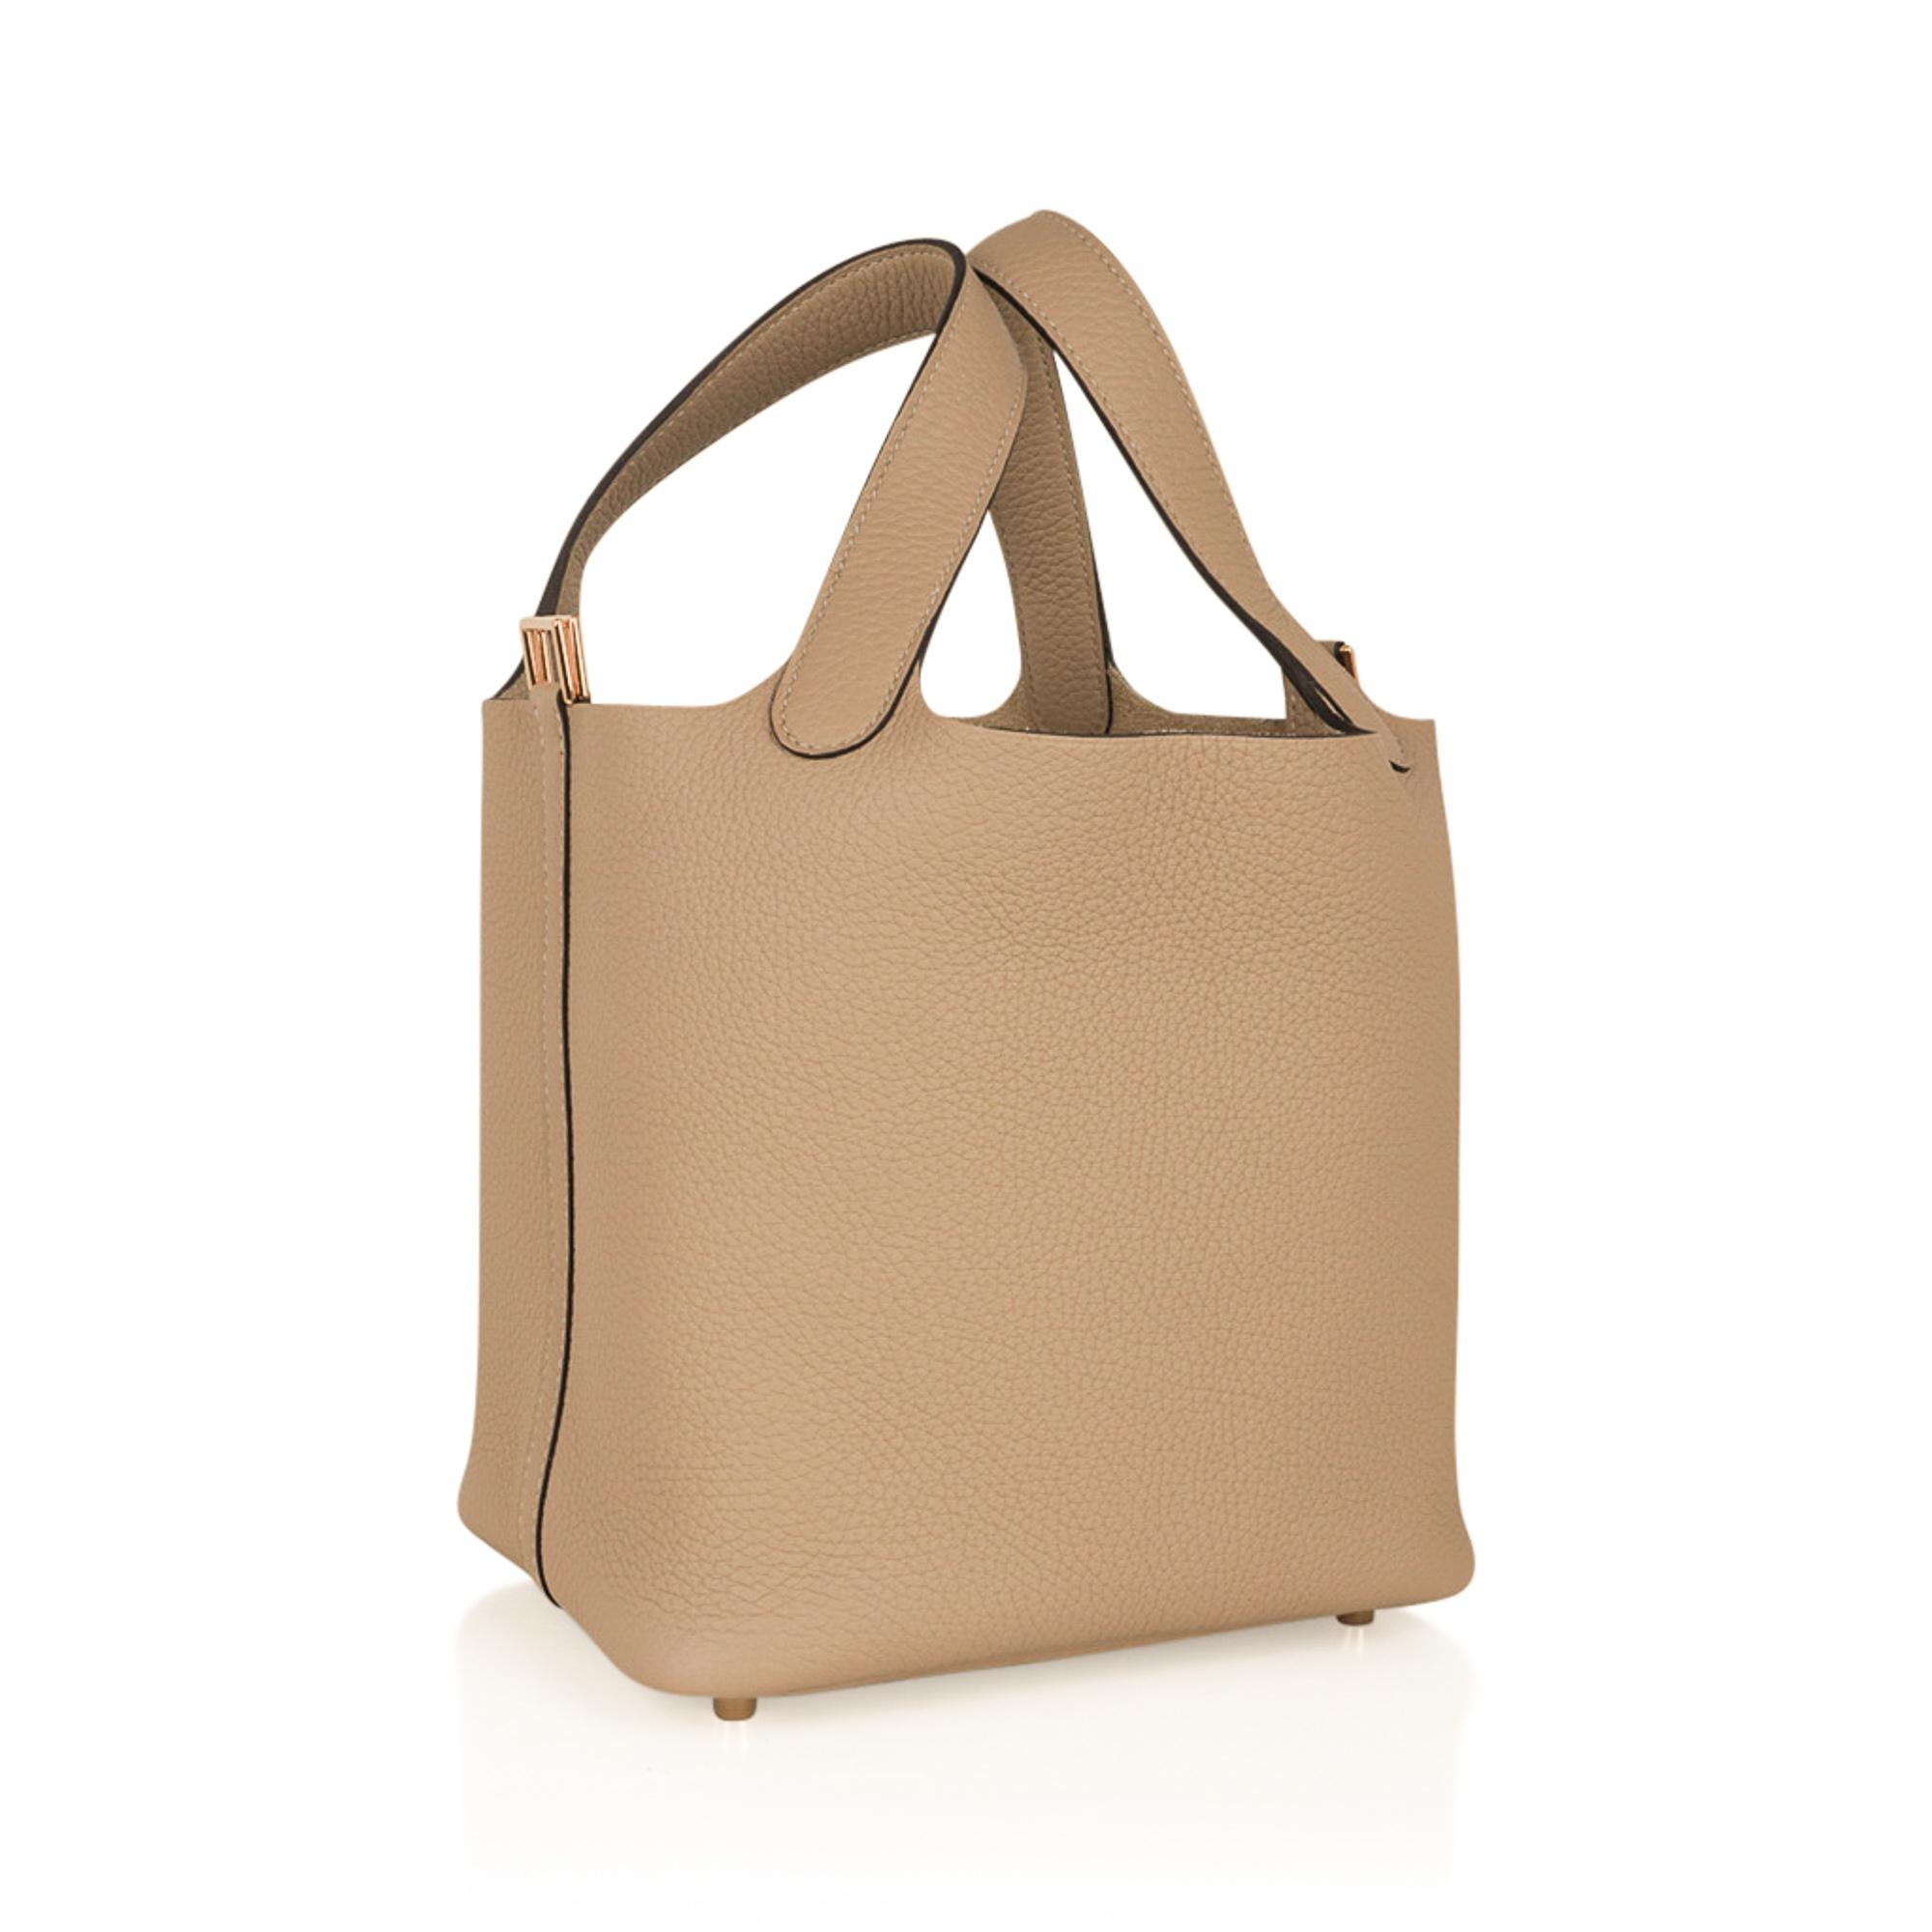 Mightychic offers an Hermes Picotin Lock 18 tote bag featured in coveted Trench.
Ultimate neutral colour.
This charming Hermes Picotin tote is a perfect everyday go to bag.
Clemence leather with Gold hardware.
Comes with lock and keys, sleeper, and